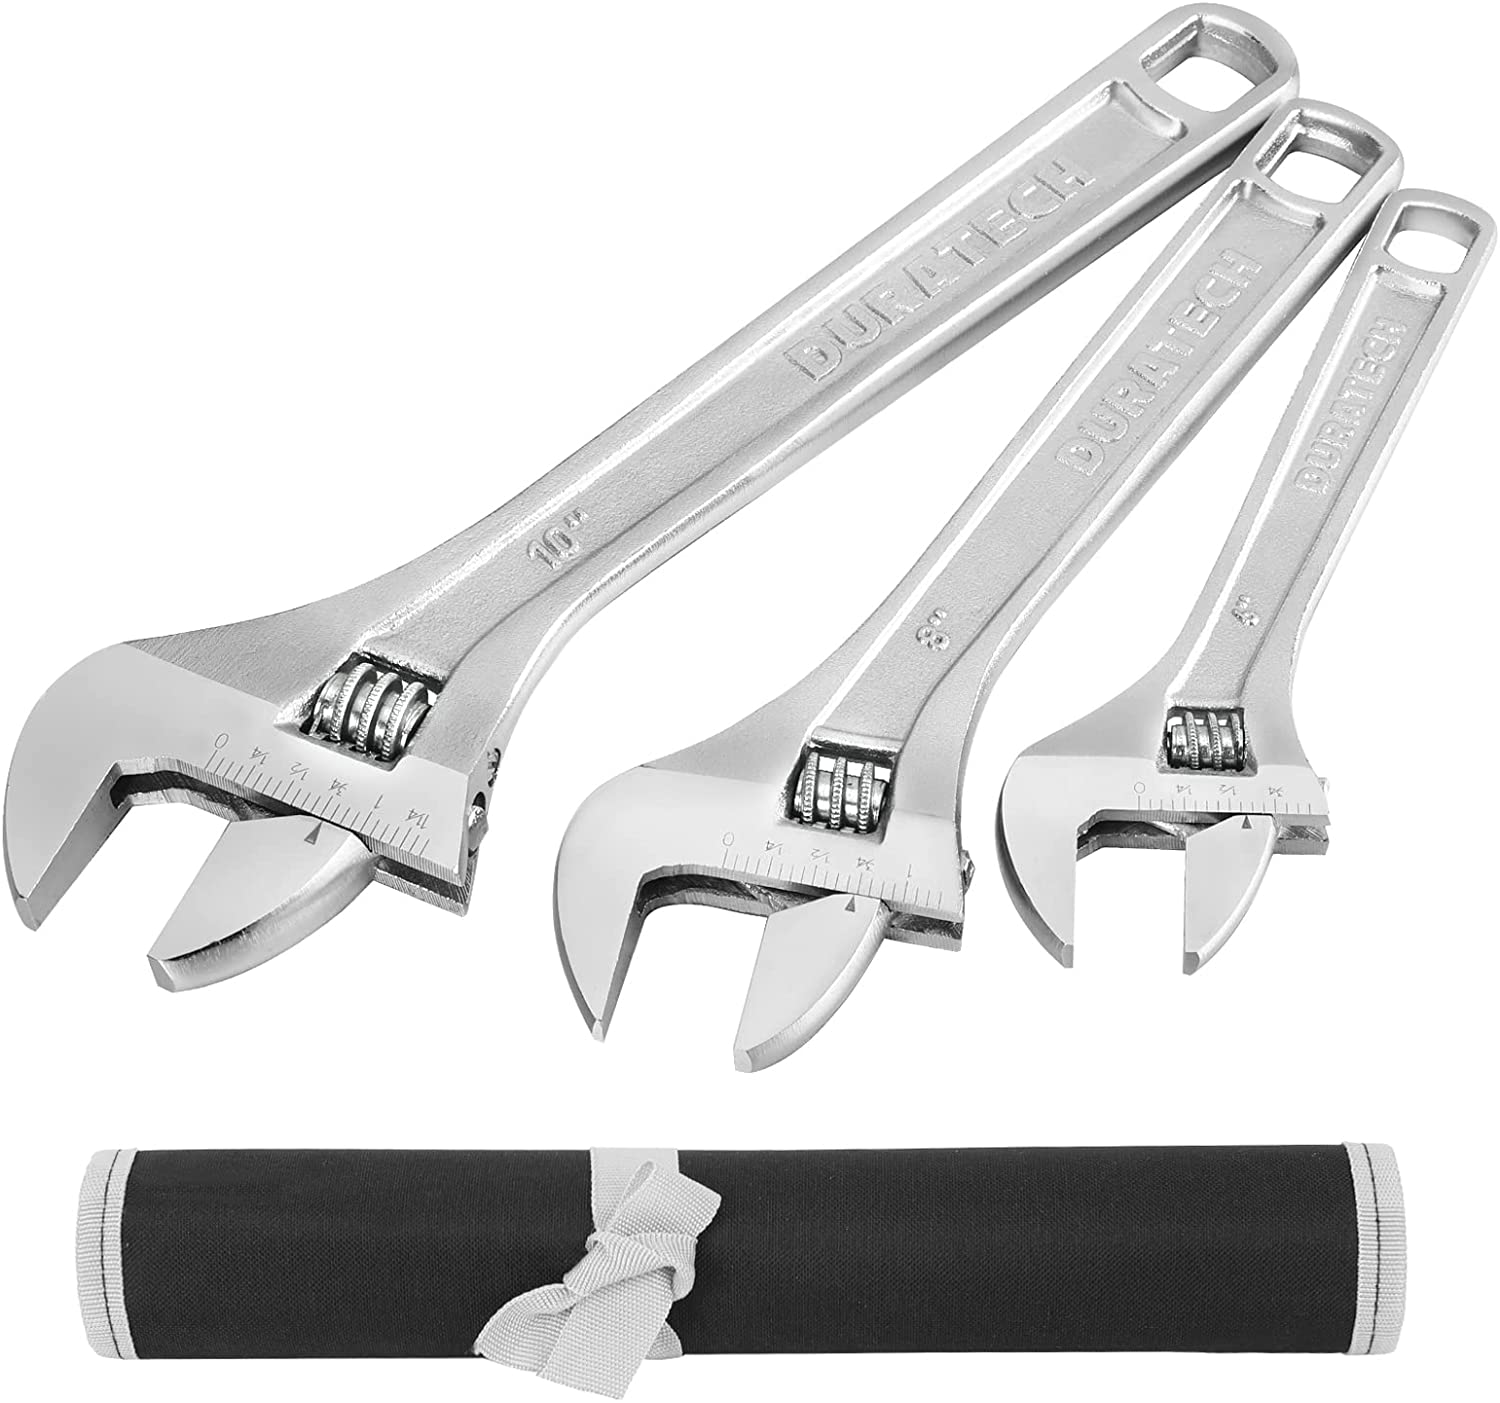 Amazon.com: DURATECH 3-Piece Adjustable Wrench Set with Roll Pouch, SAE and Metric Scale Marked, Forged Cr-V, Chrome-plated, 6-inch, 8-inch, 10-inch, : Everything Else $16.79